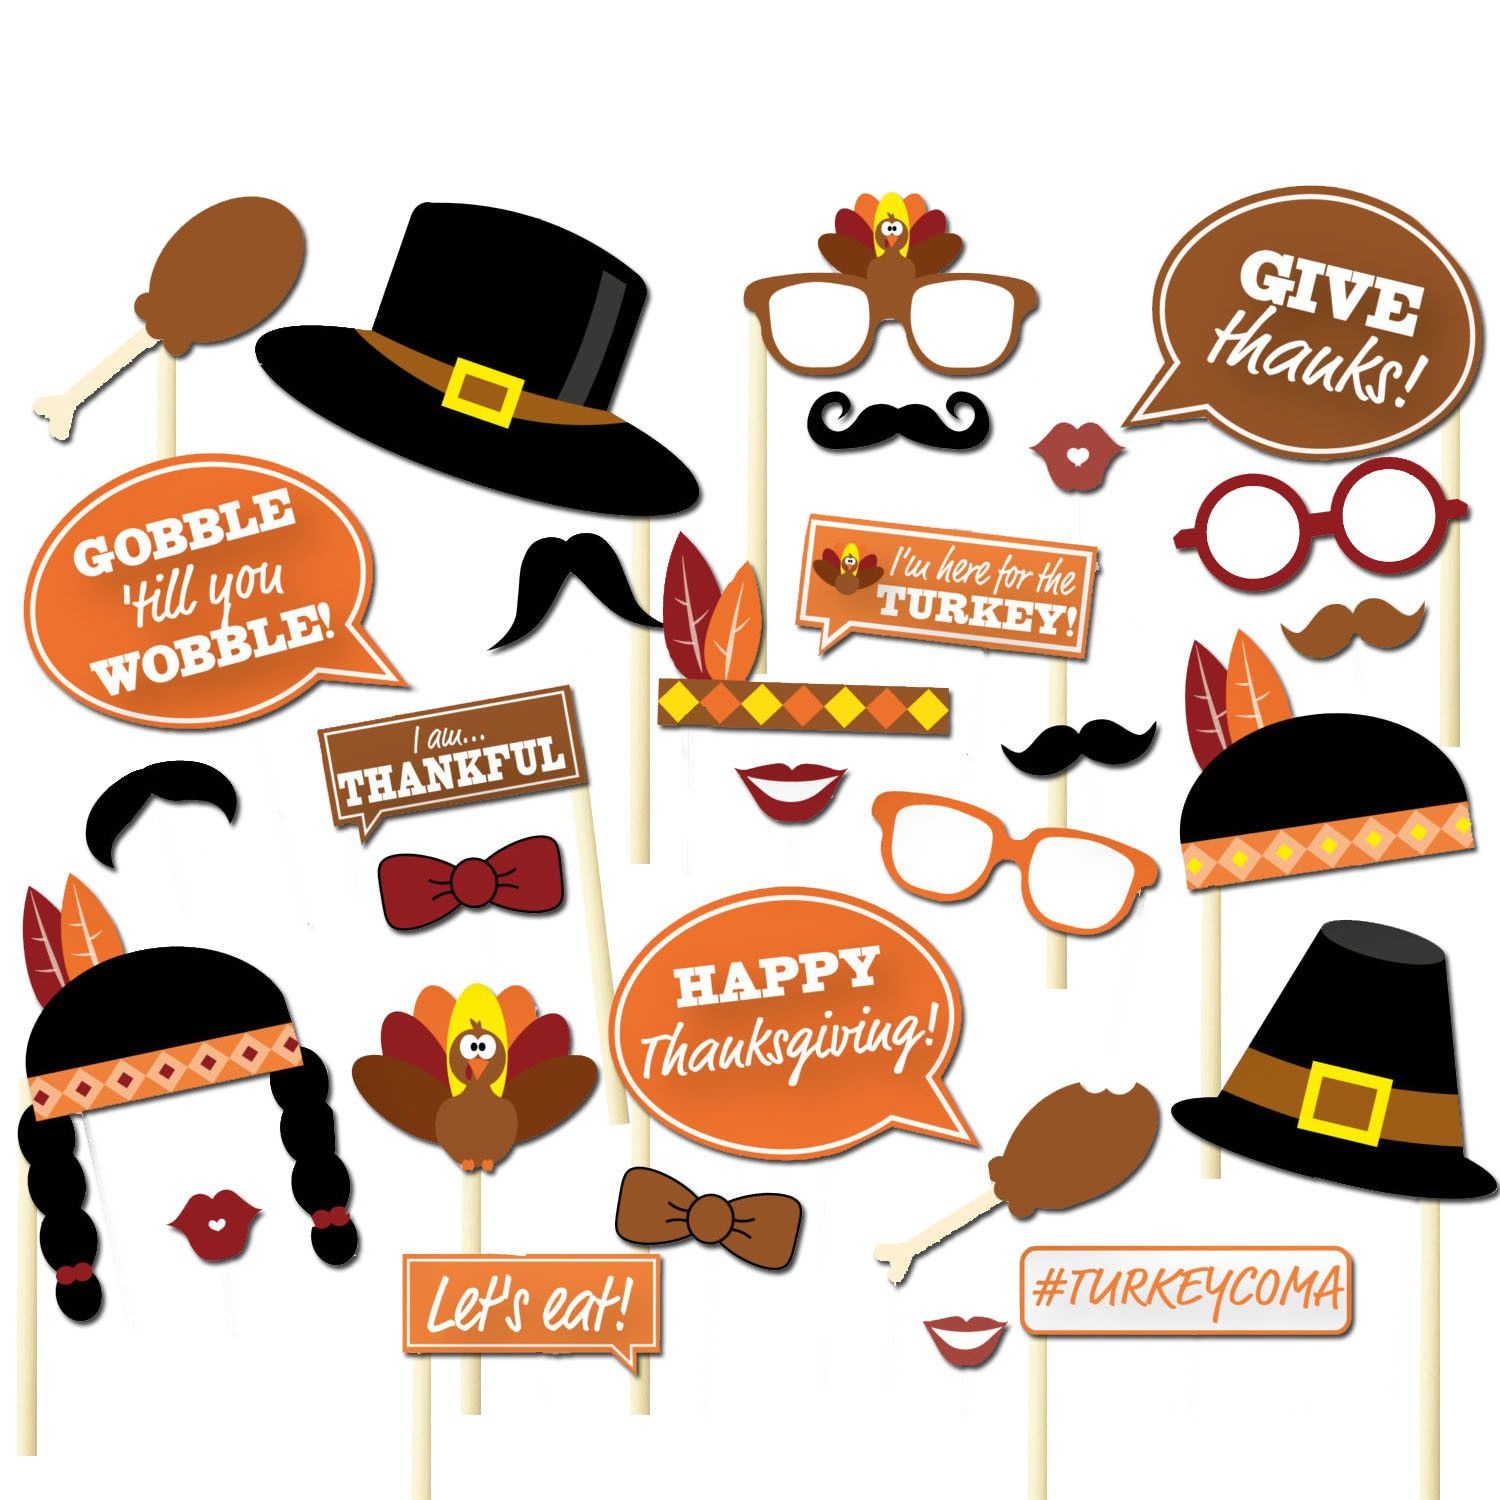 Details About 29Pcs Thanksgiving Day Party Supplies Decorations - Free Printable Thanksgiving Photo Props